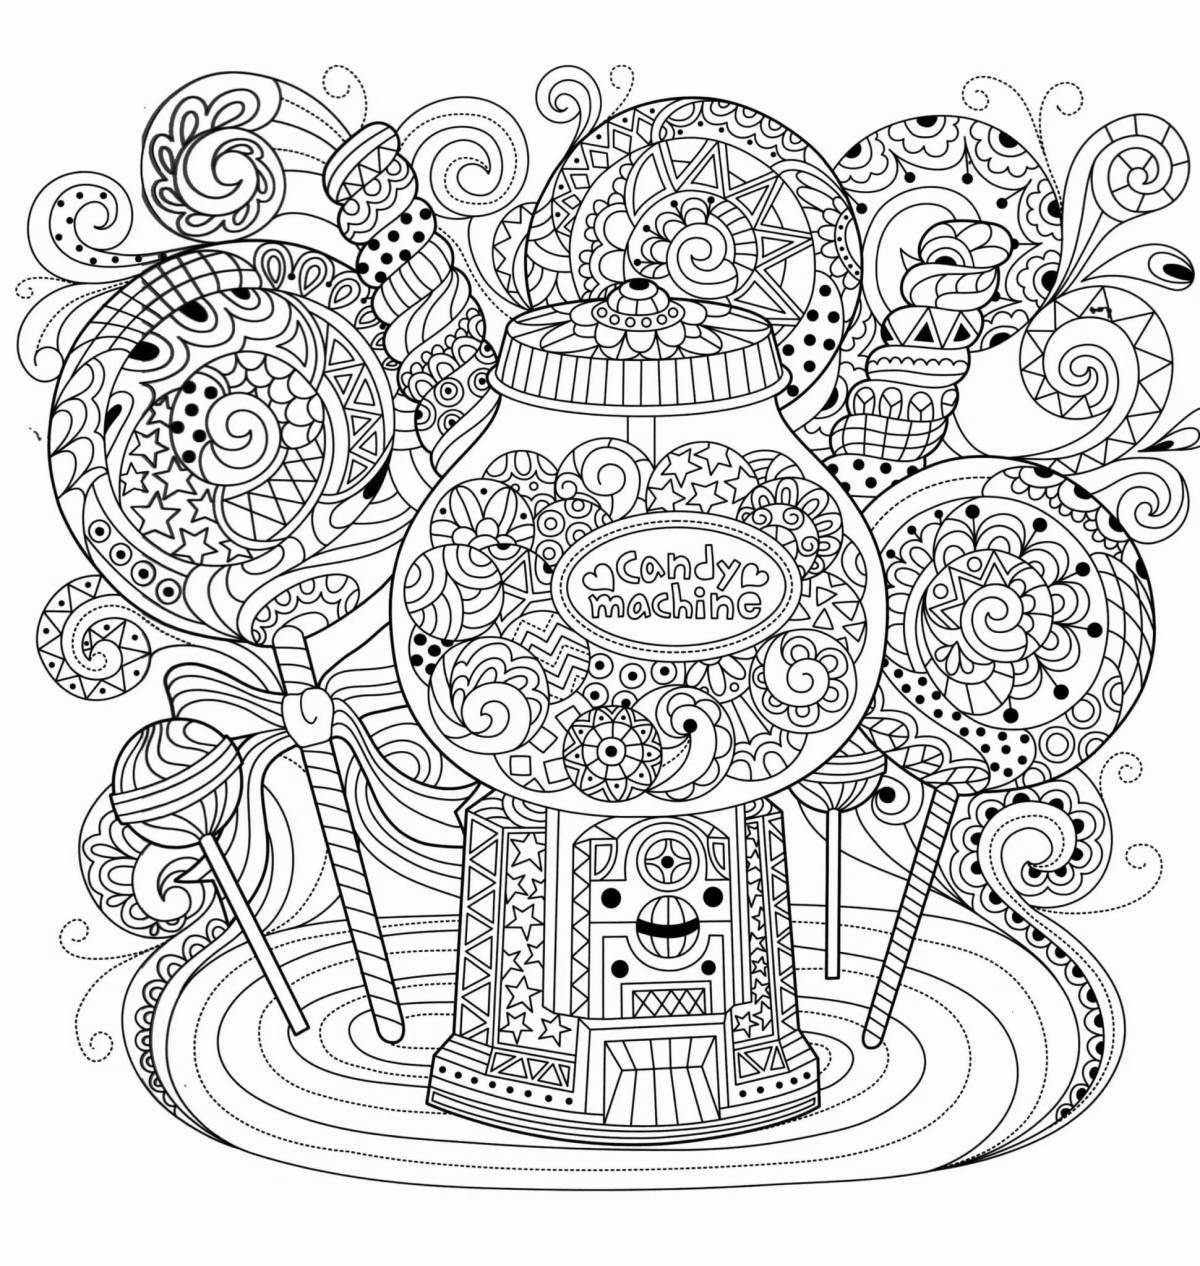 Blissful anti-stress coloring book for teens